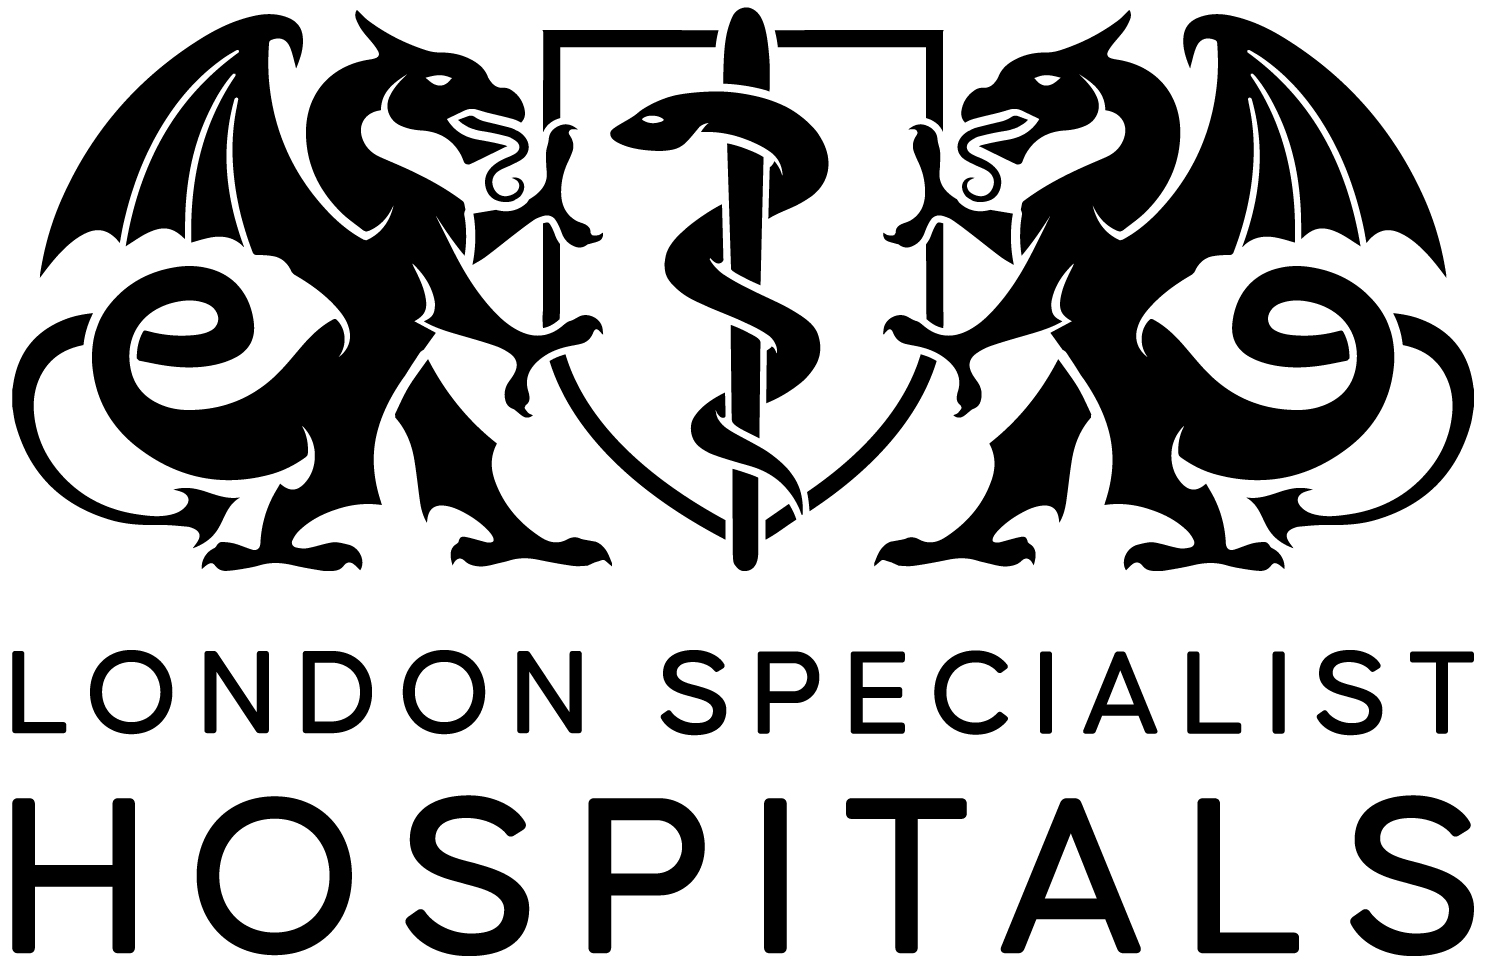 London Specialist Hospitals for comprehensive private healthcare